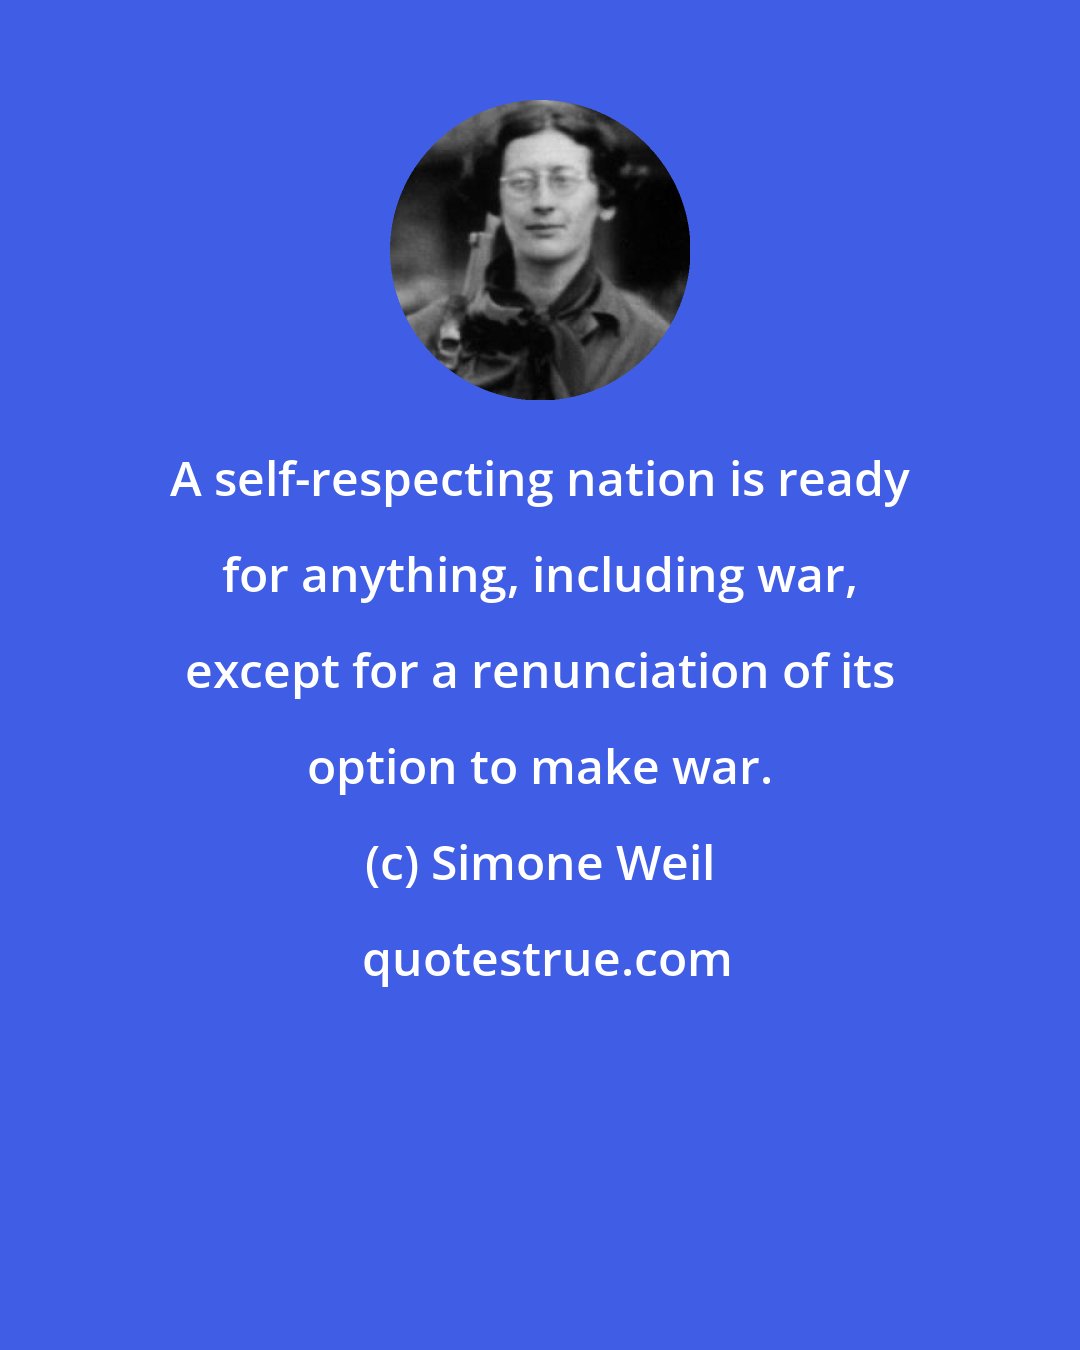 Simone Weil: A self-respecting nation is ready for anything, including war, except for a renunciation of its option to make war.